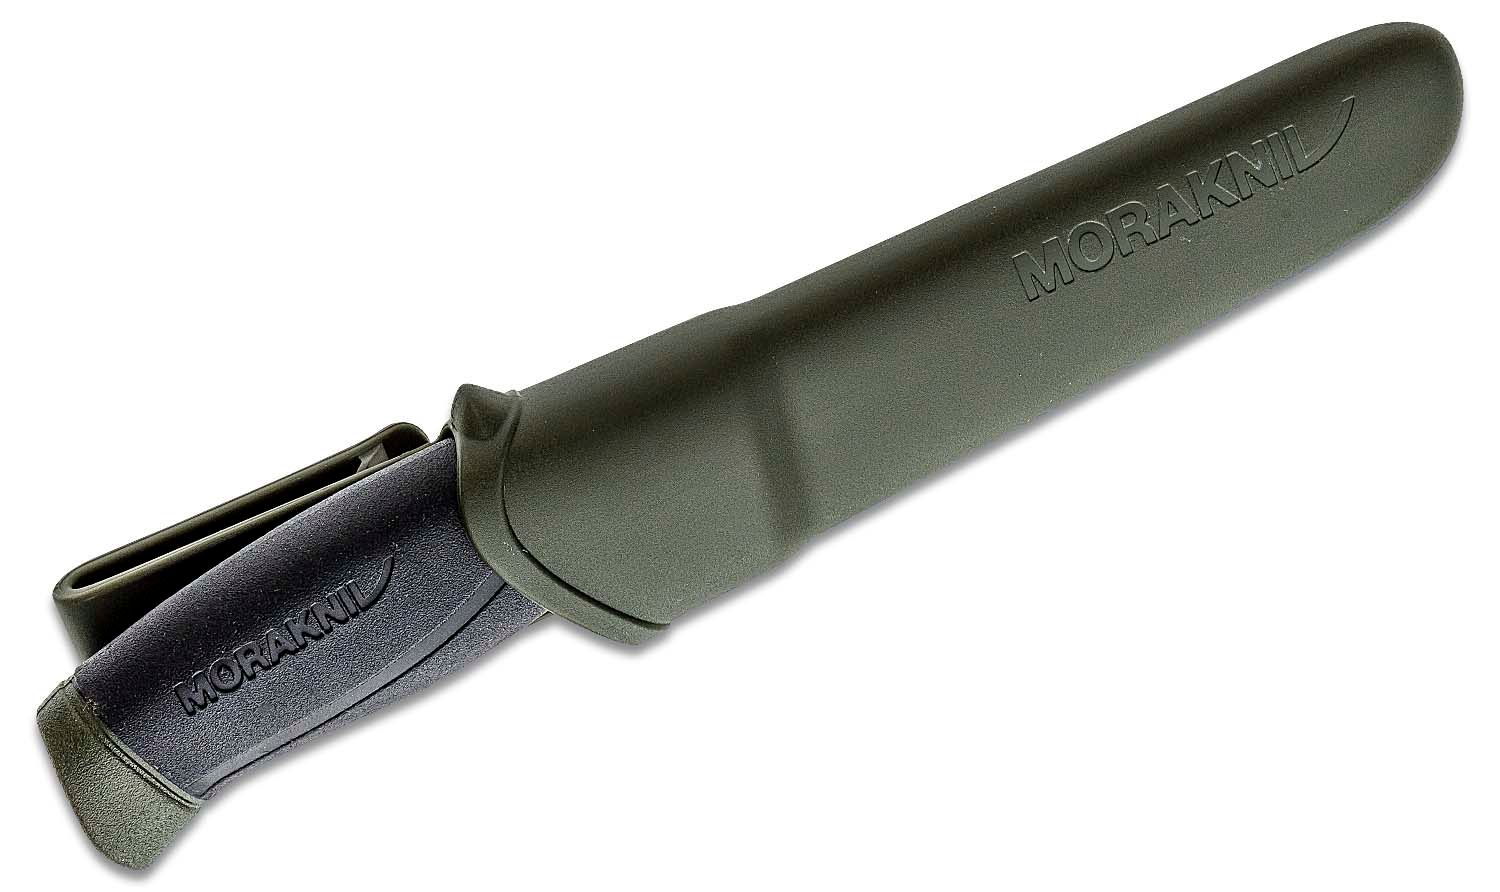  Morakniv Companion Carbon Steel Fixed-Blade Knife with Sheath,  4.1 Inch, Military Green : Sports & Outdoors